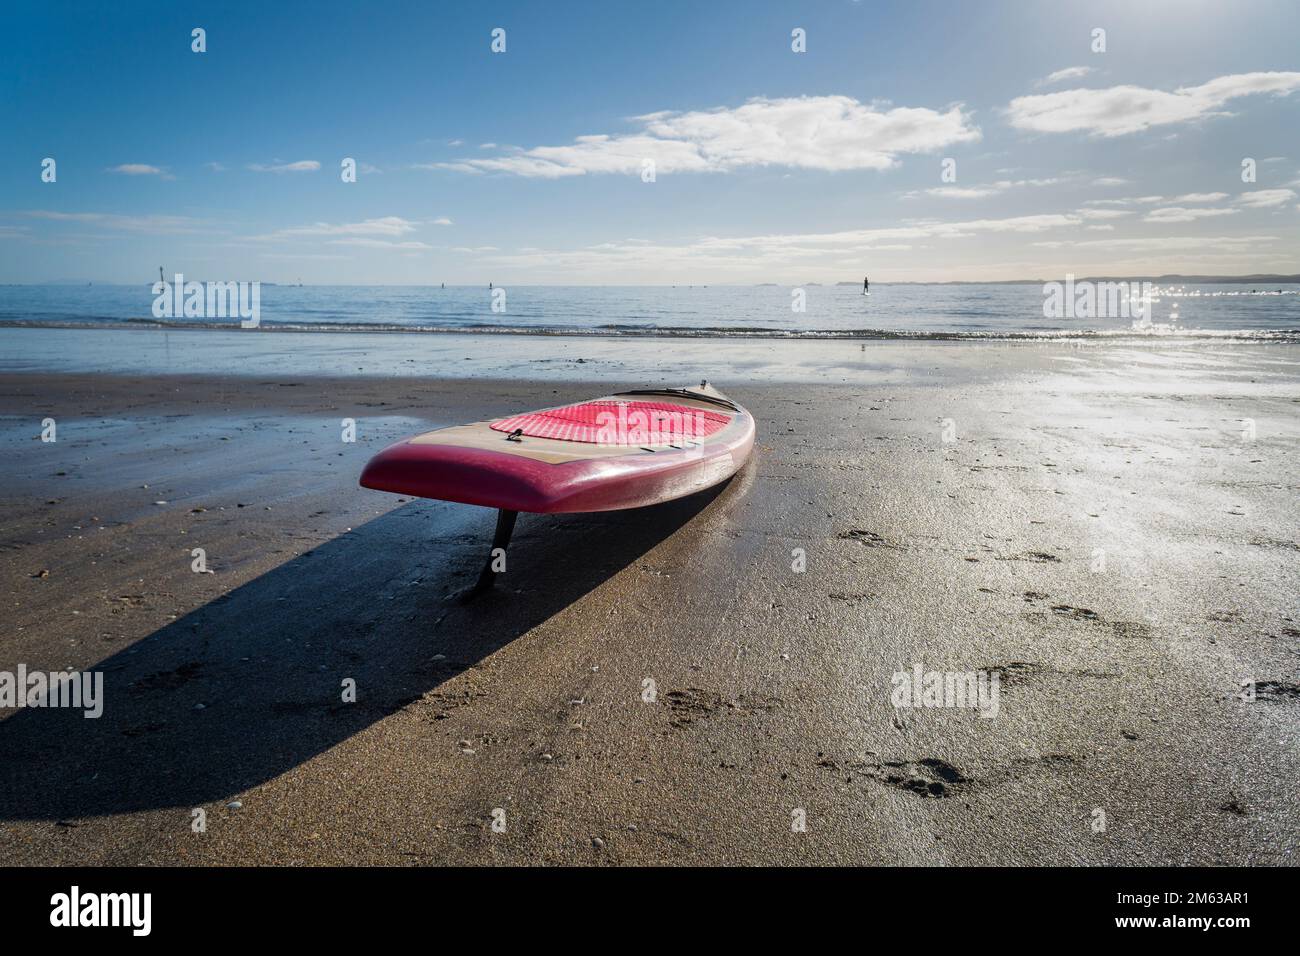 A stand up paddle board on a sandy beach with out-of-focus people paddle boarding in the sea. Auckland. Stock Photo